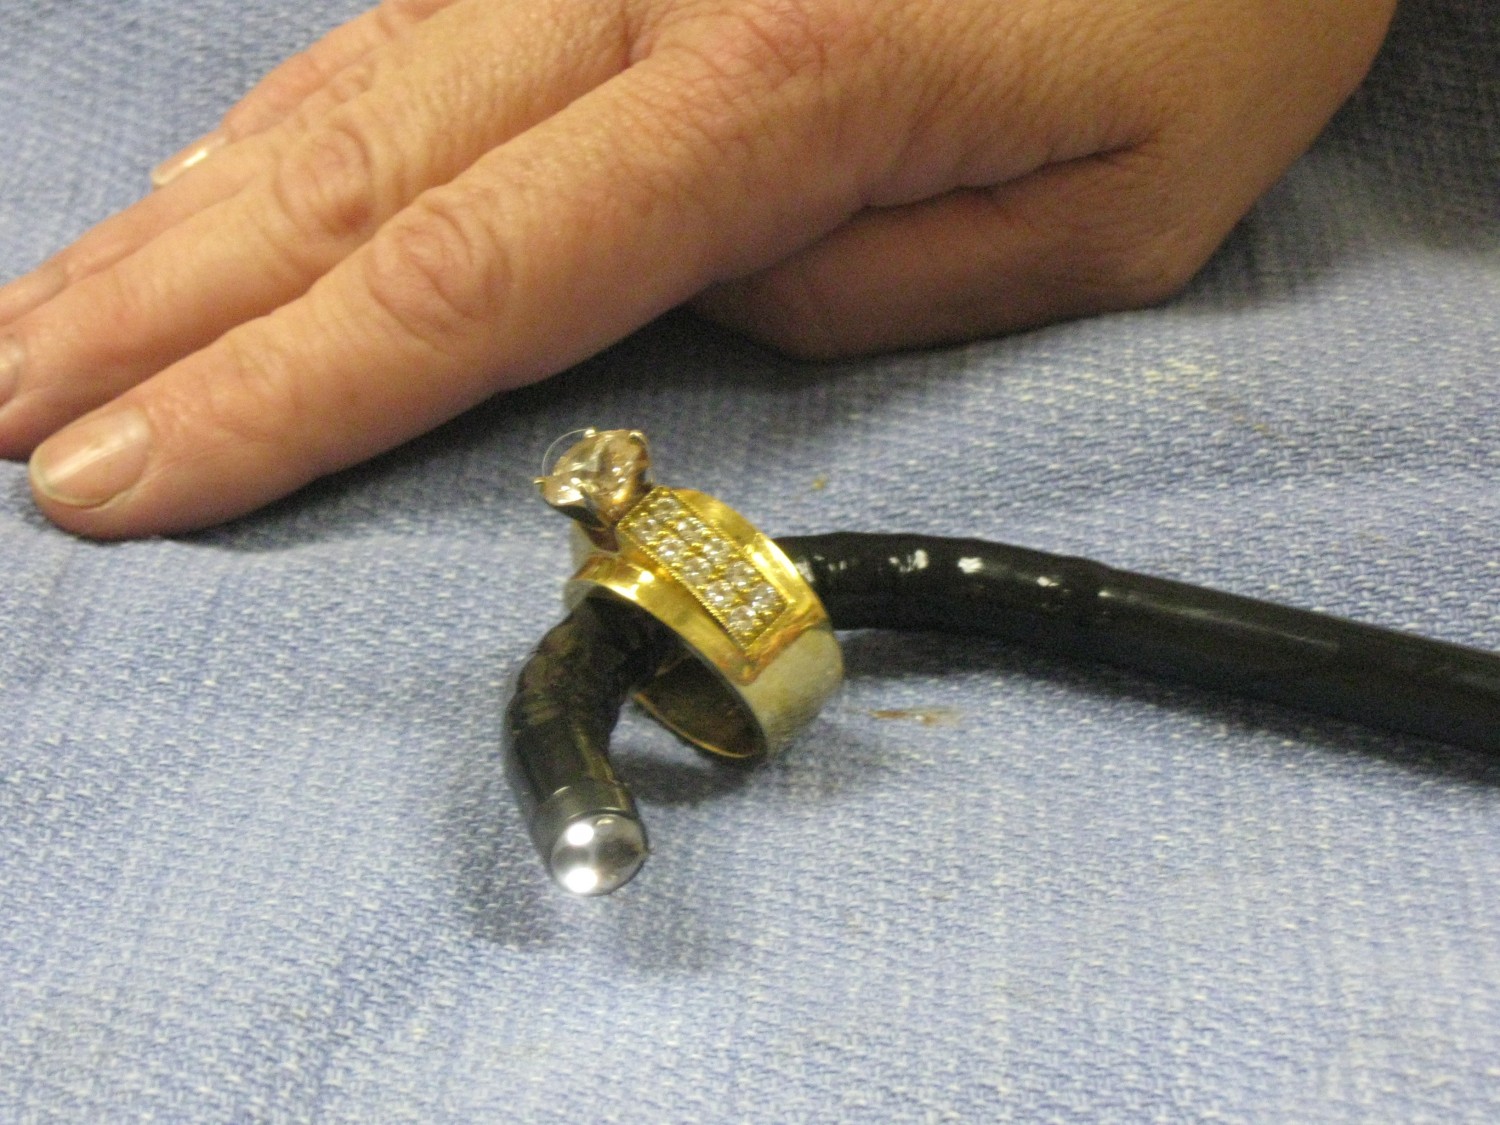 Over-sized wedding ring retrieved with endoscope